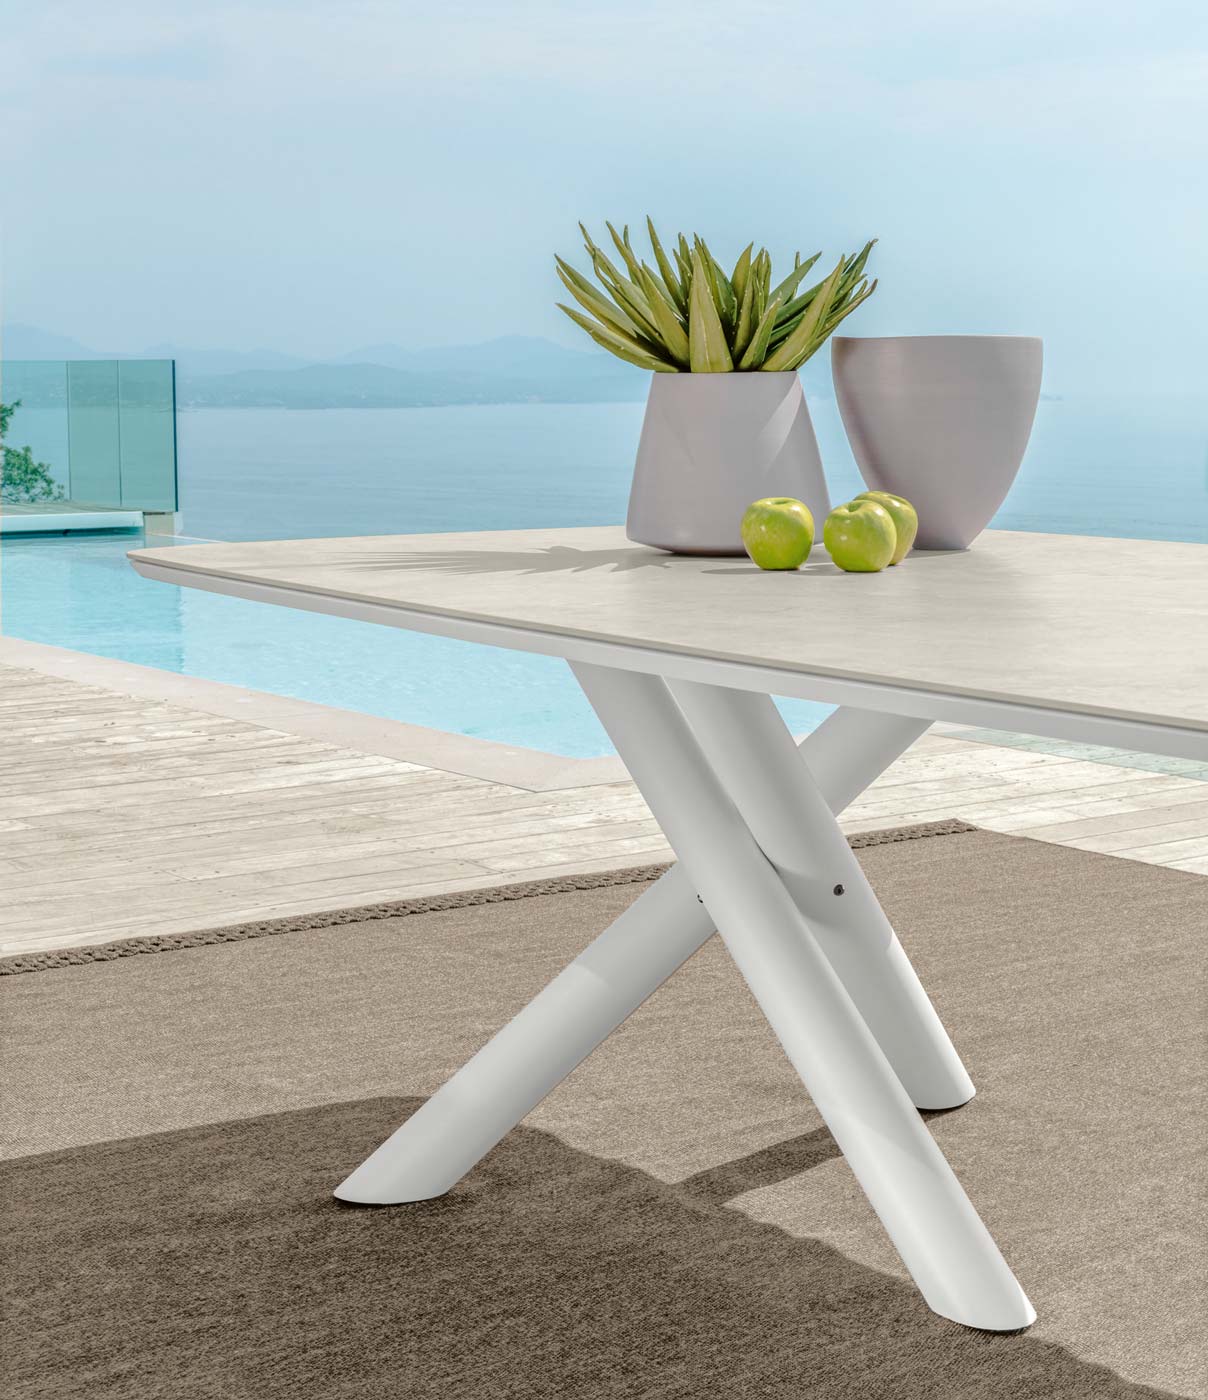 TALENTI | CORAL  DINING TABLE - $2,009.37 - $5,553.67